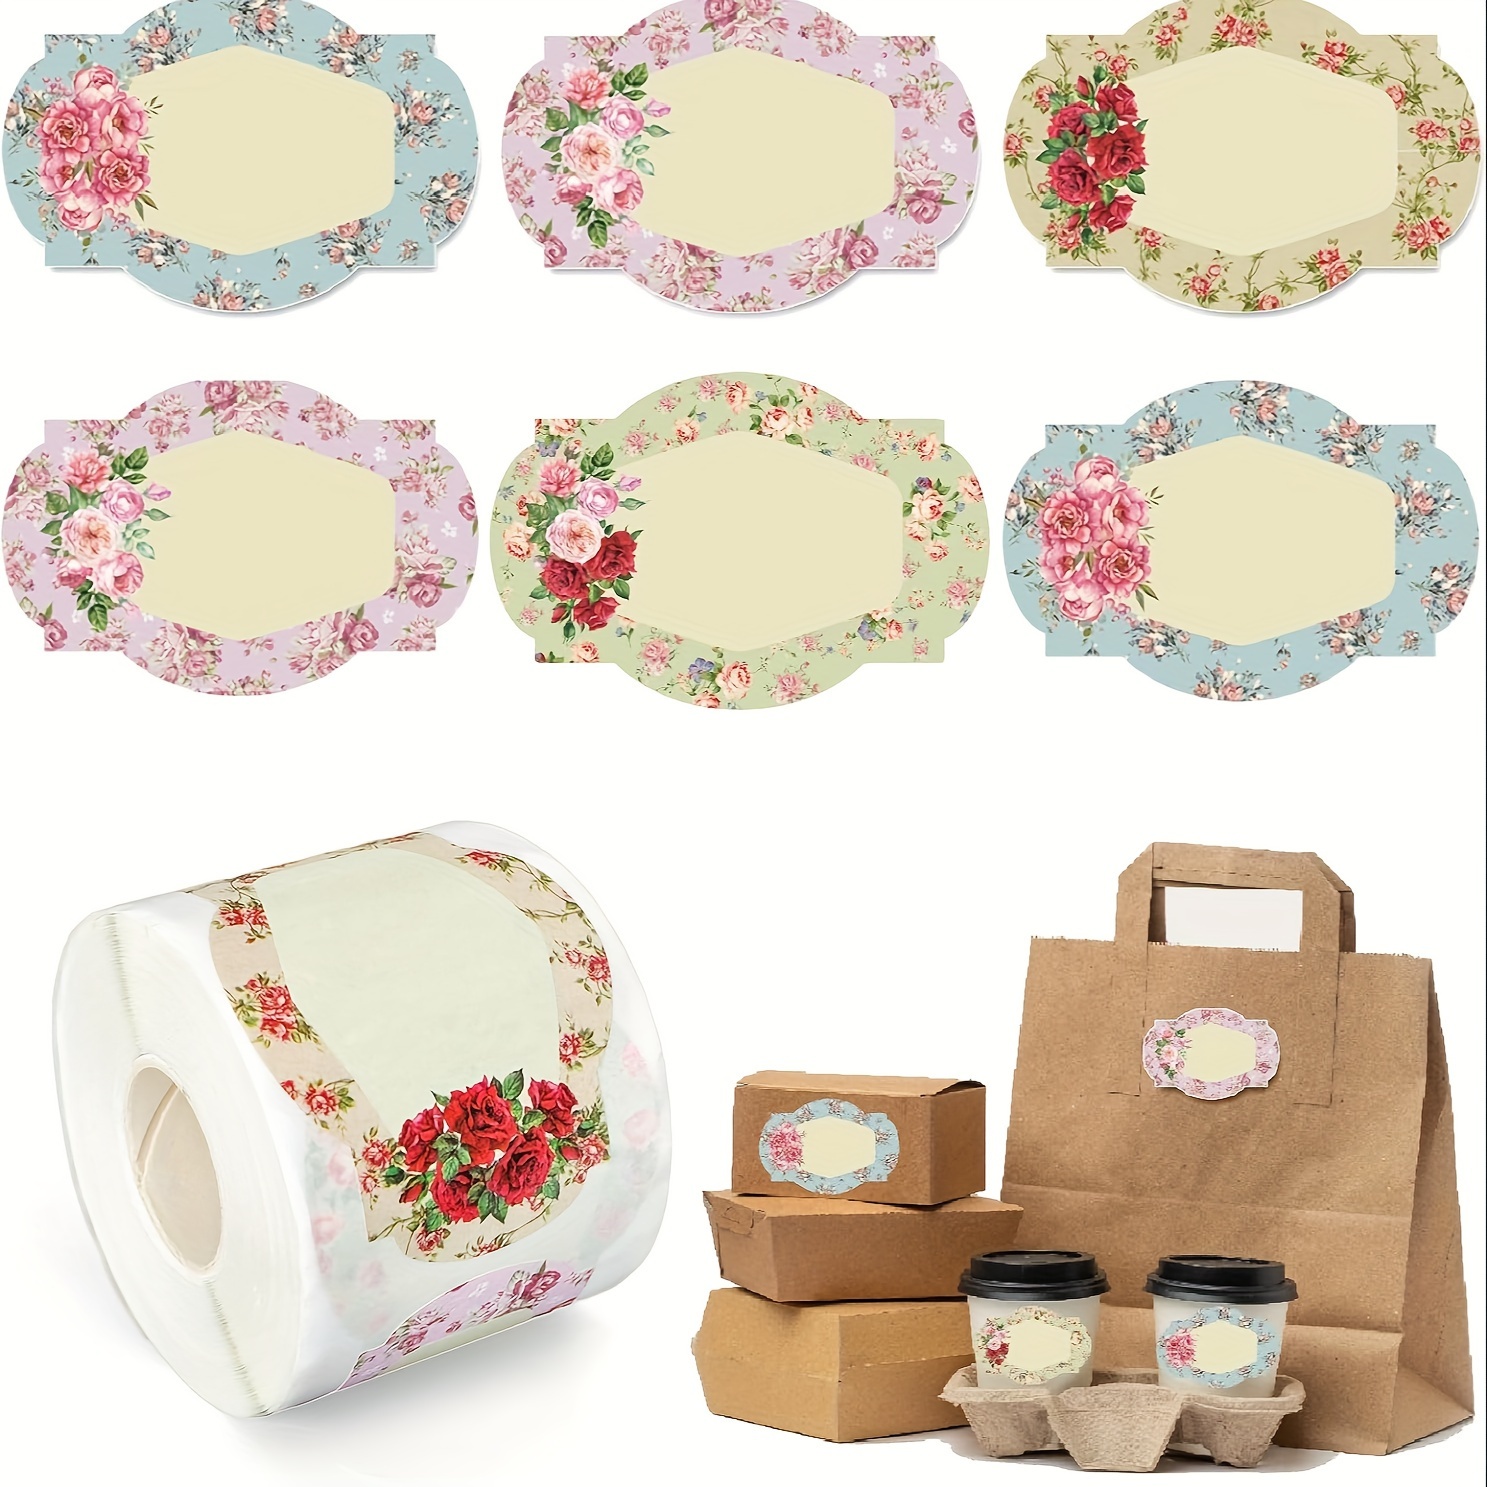 

Vintage Floral Thank You Stickers - 250 Roll, Perfect For Gift Wrapping & Crafts Floral Stickers